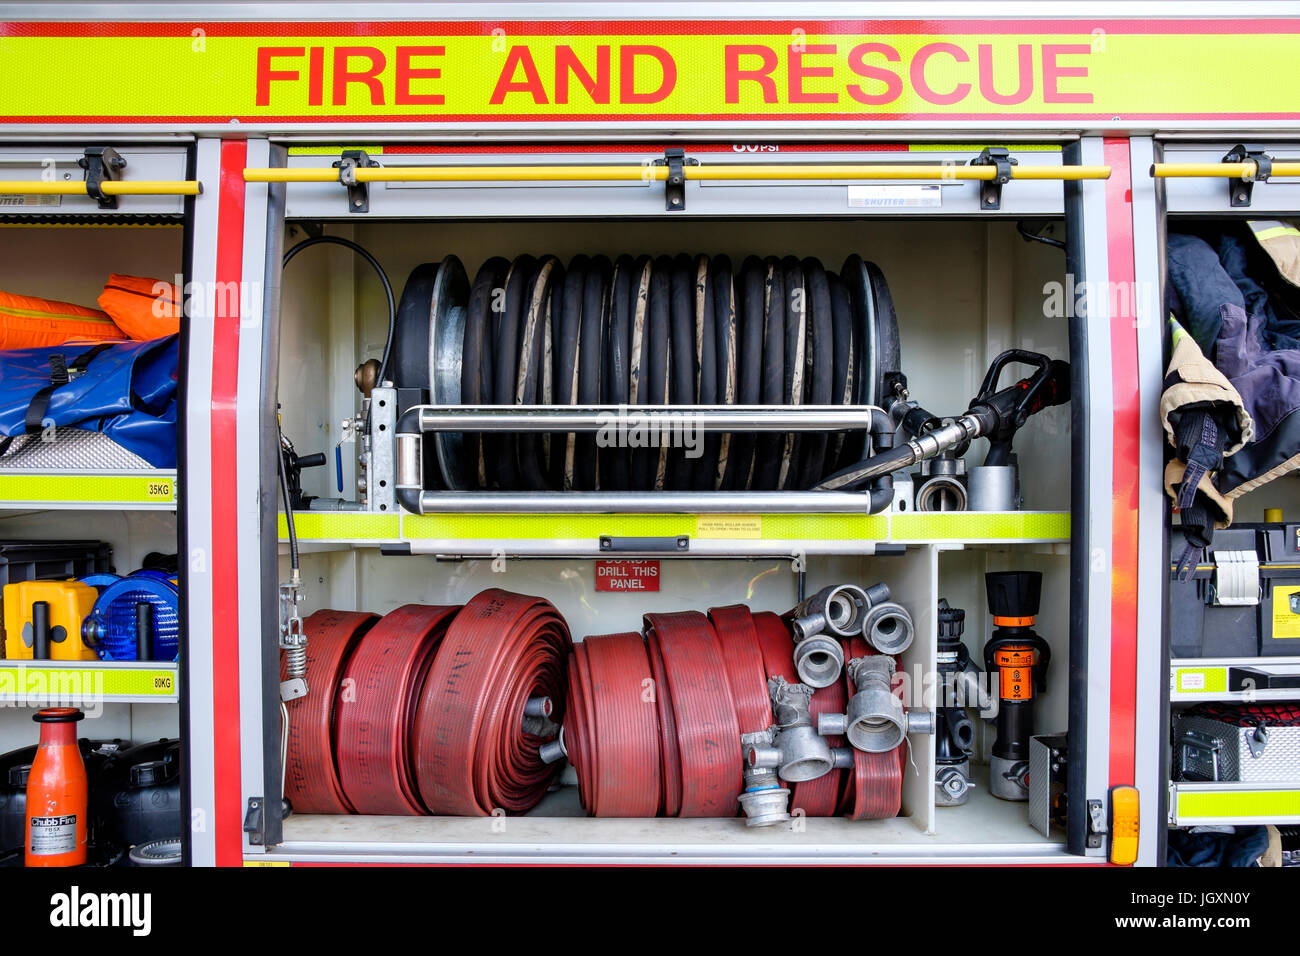 Firefighting fire-fighting and rescue equipment in a British fire engine truck tender. Stock Photo